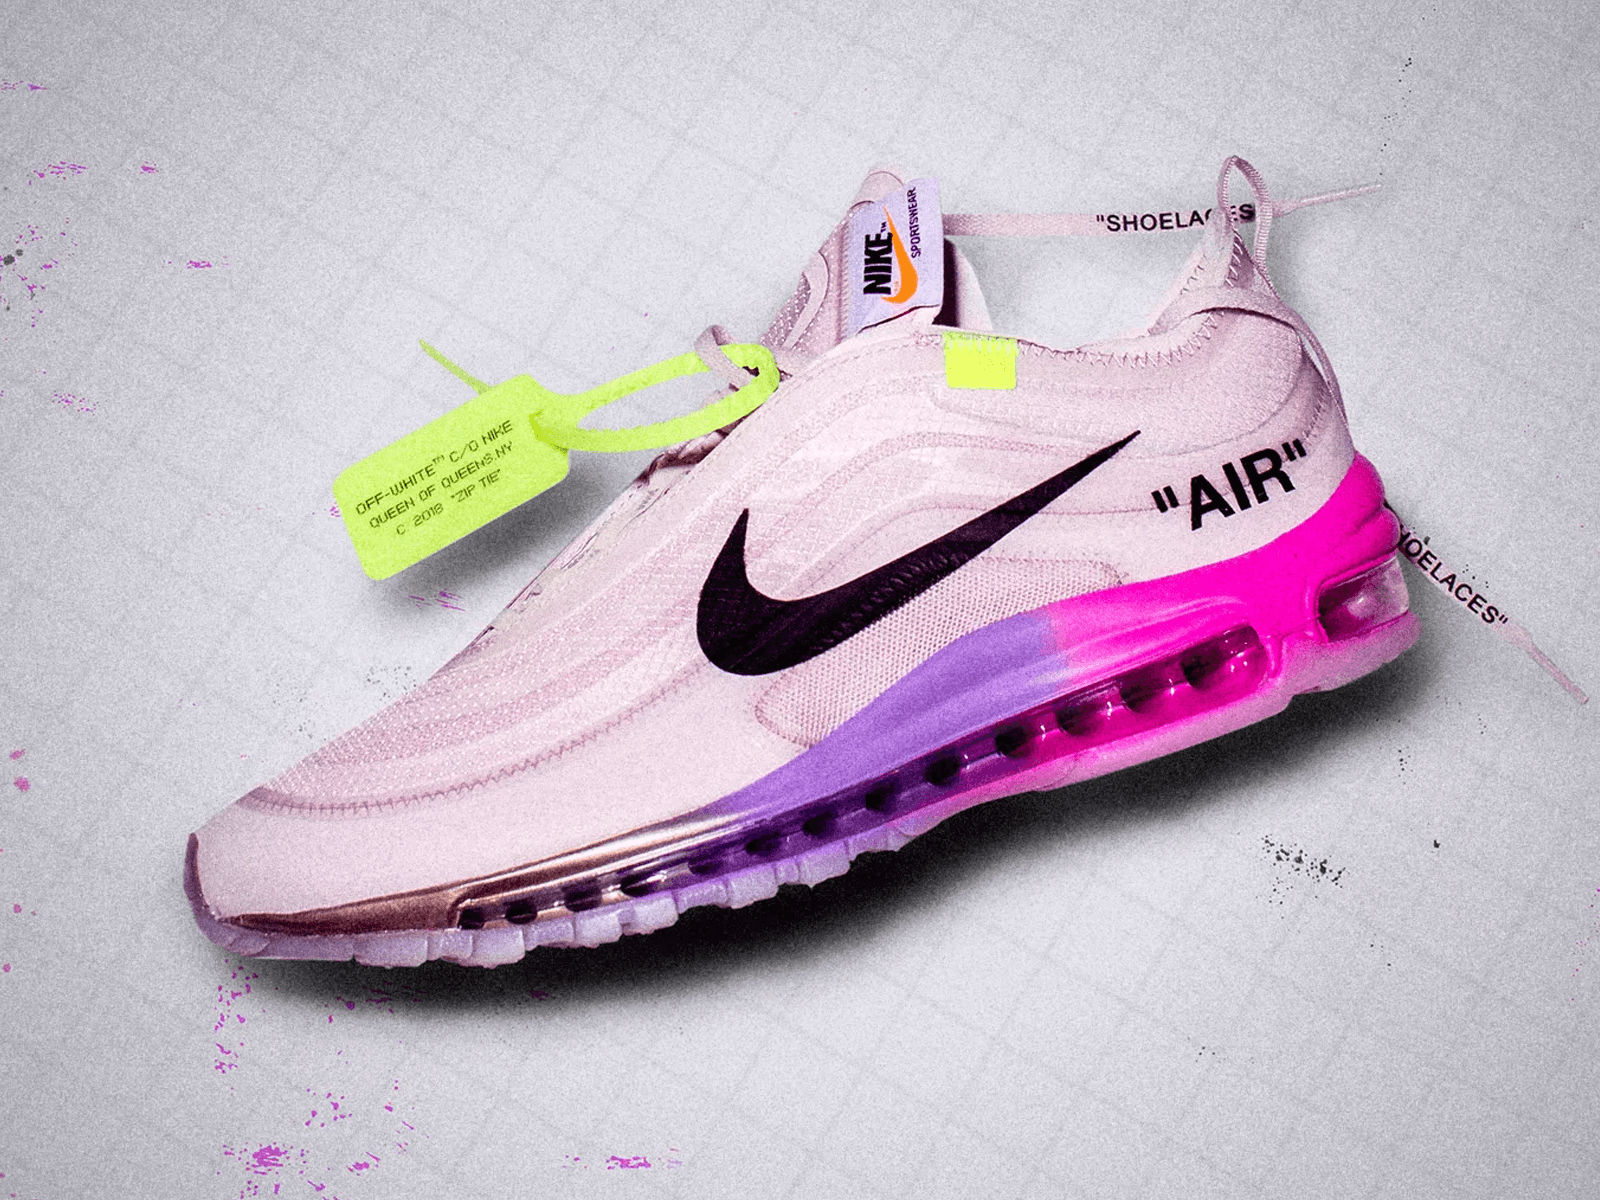 The Virgil Abloh x Nike Air Max 97 SW was released in the US